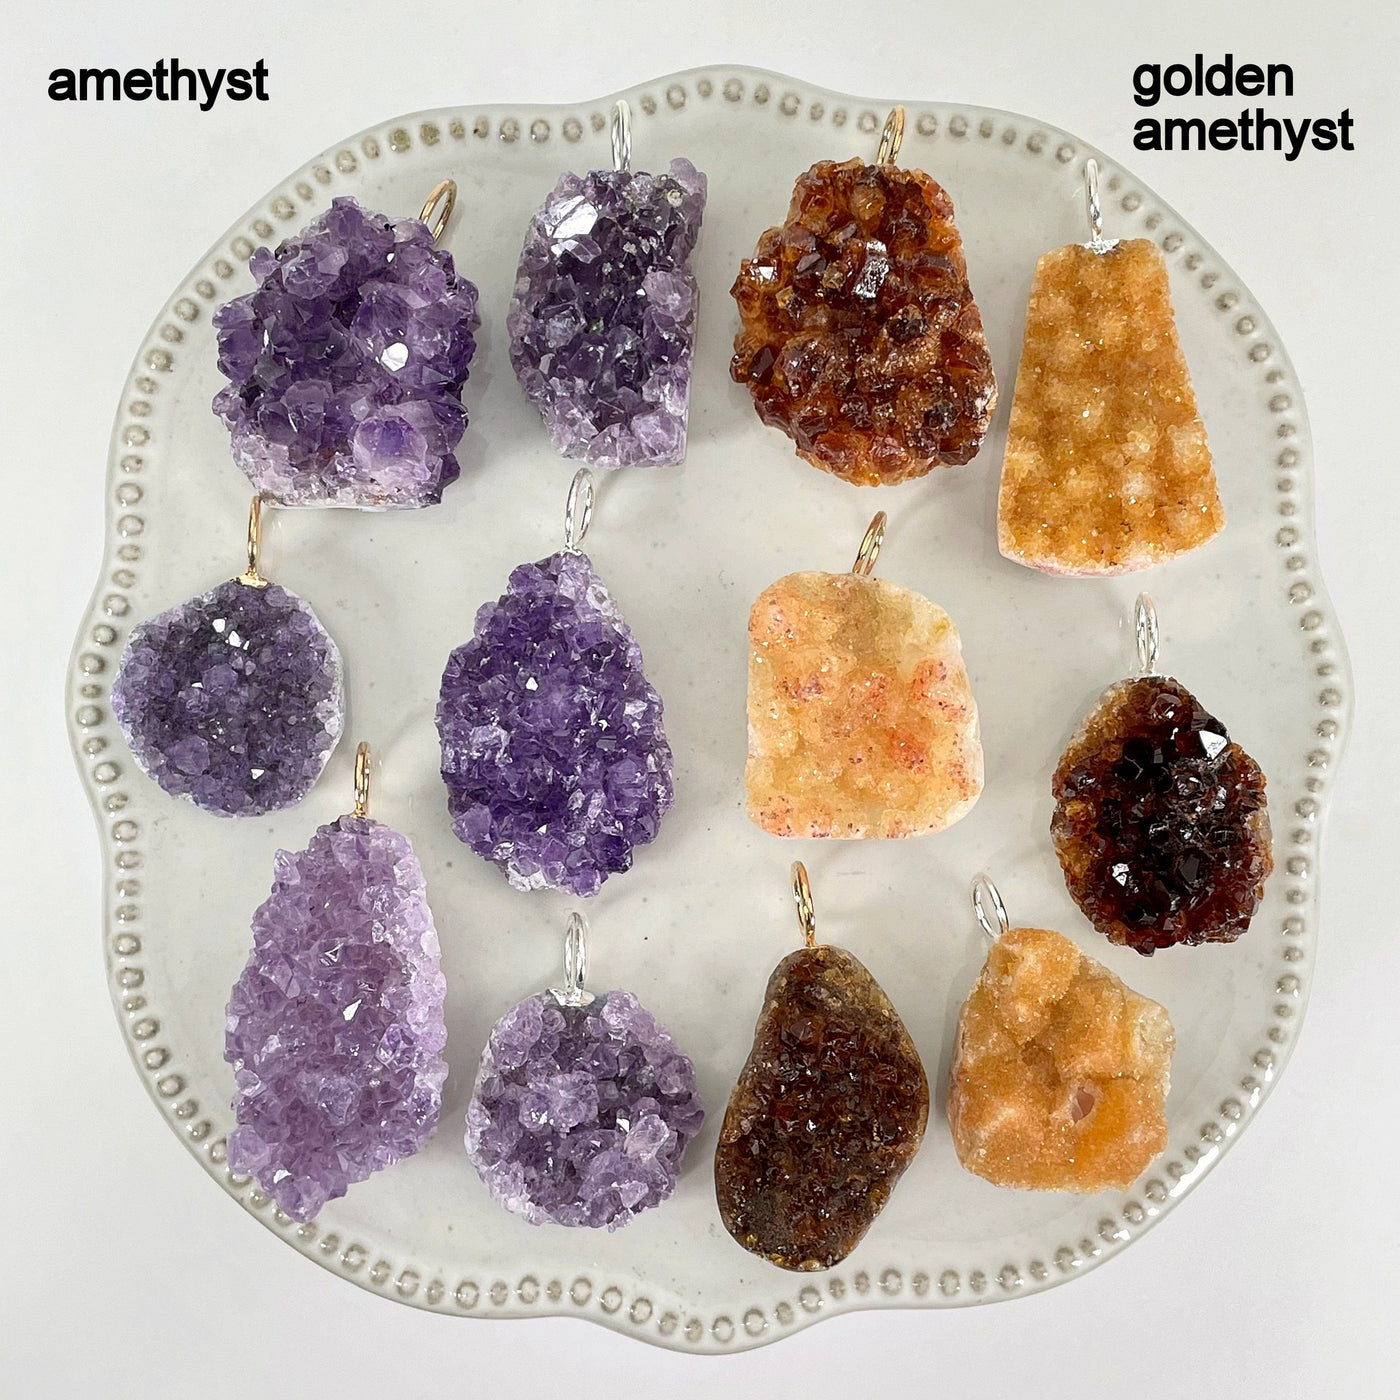 overhead view of many amethyst druzy cluster pendant options on display for possible variations